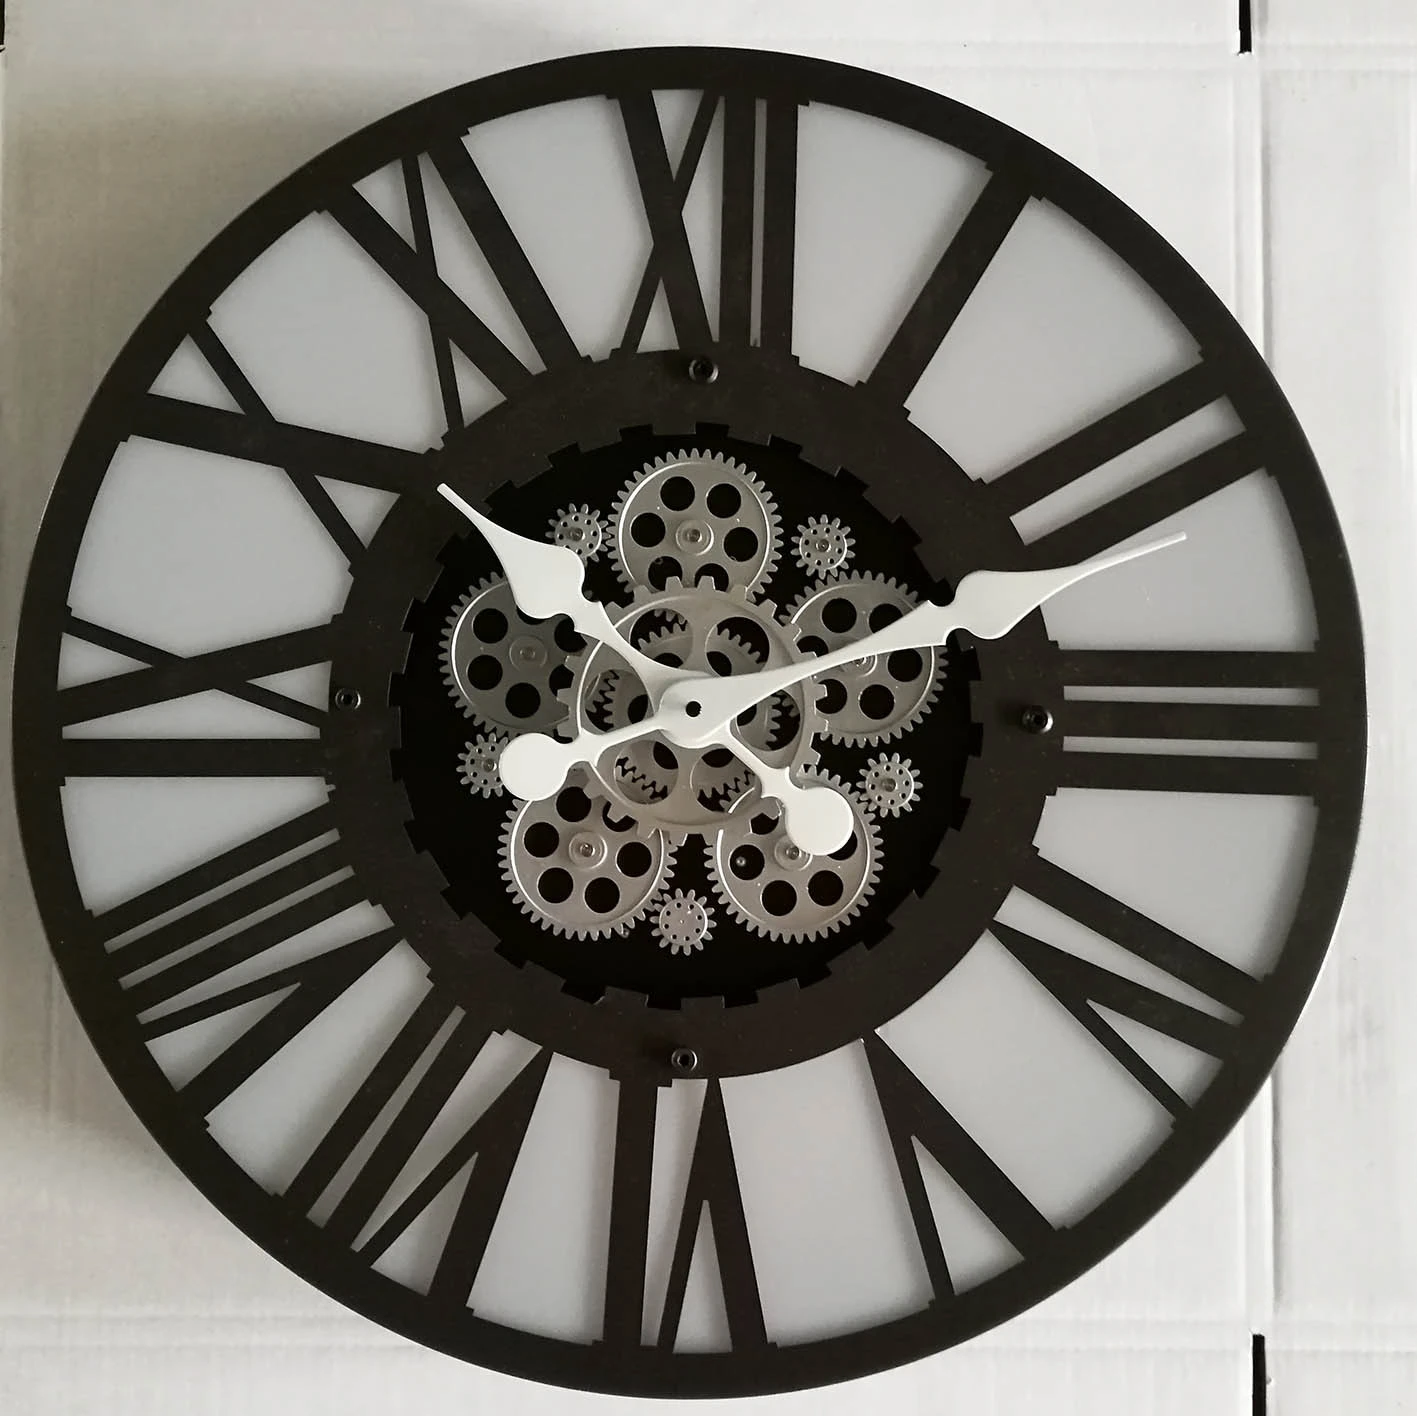 10inch metal mechanical real moving gear wall clock for decor